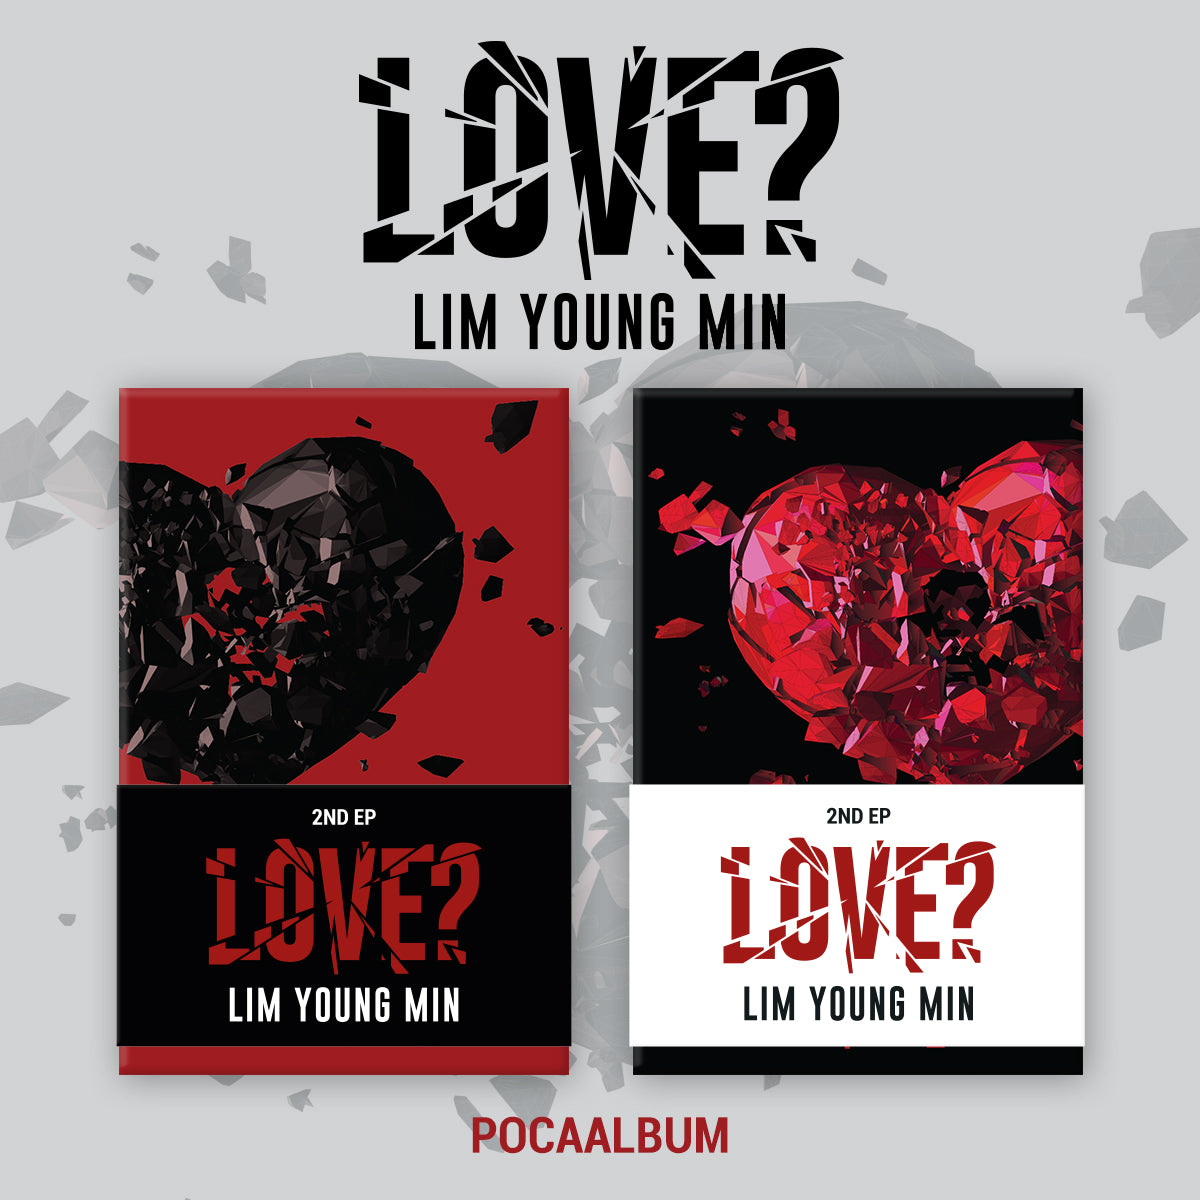 LIM YOUNG MIN - LOVE?